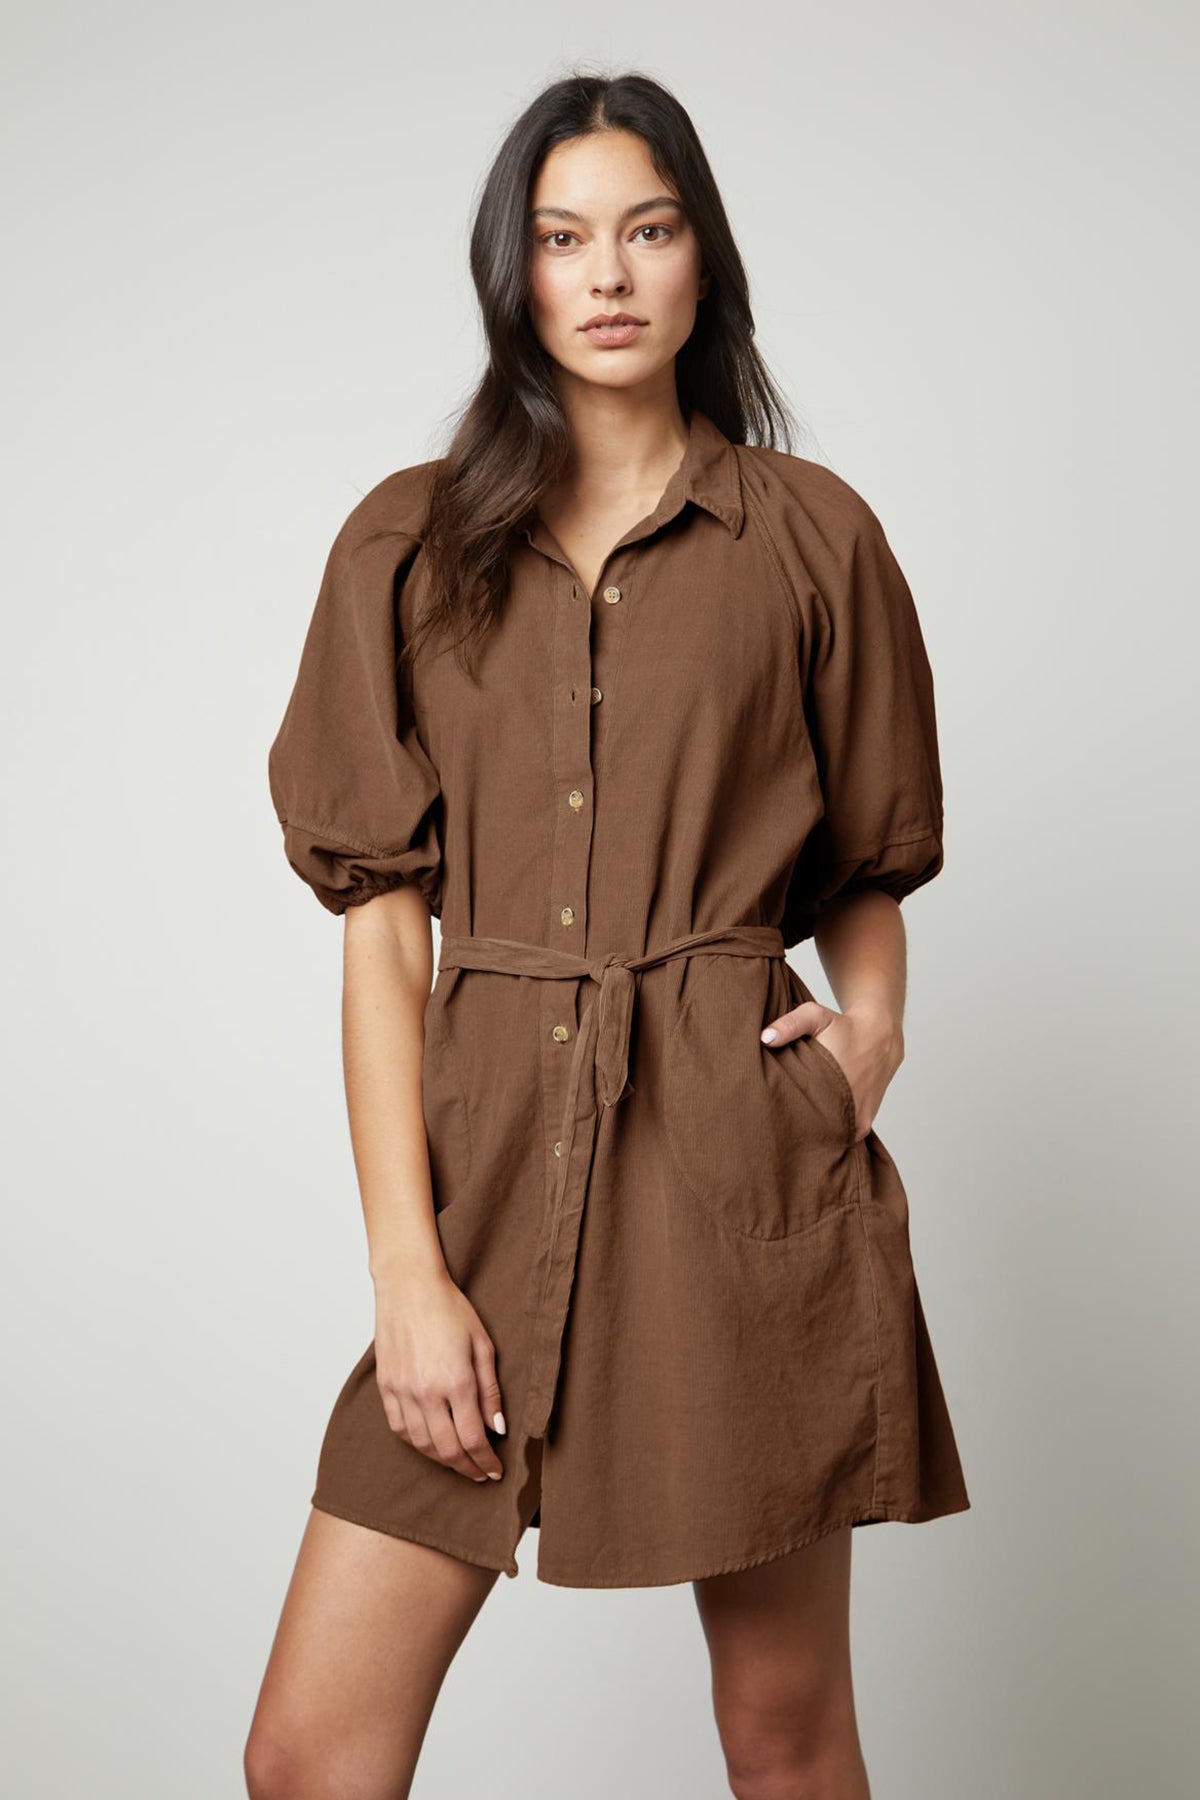   The model is wearing a KADY CORDUROY BUTTON-UP DRESS by Velvet by Graham & Spencer. 